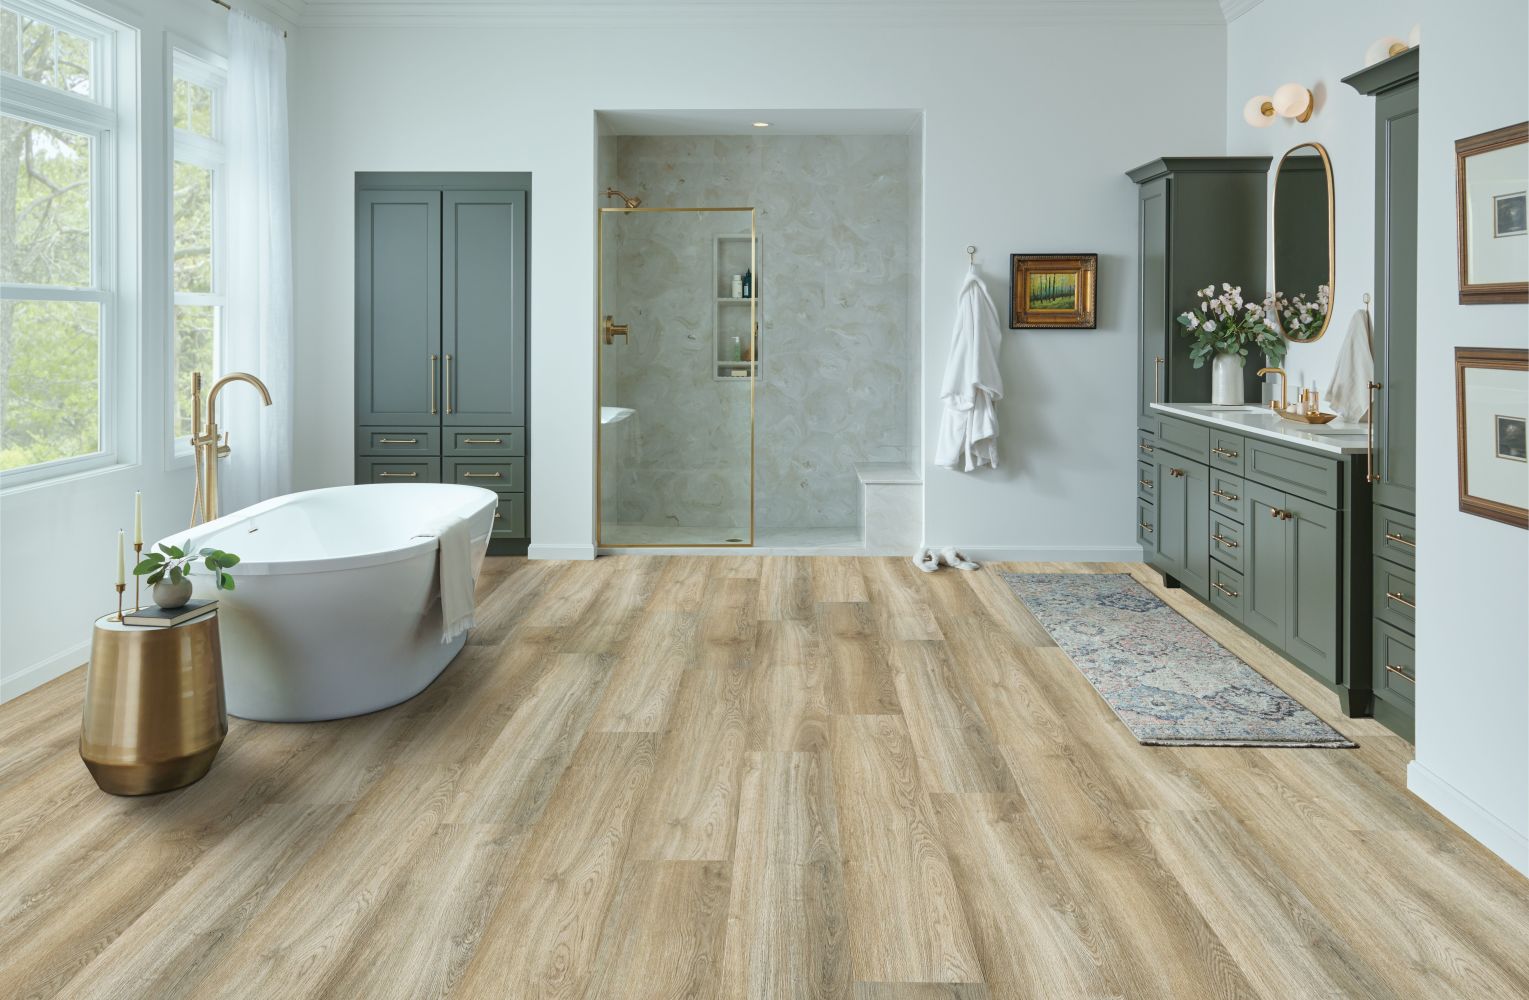 Armstrong Rigid Core Flooring Lutea Paradise Tranquil Brown AR5LS111